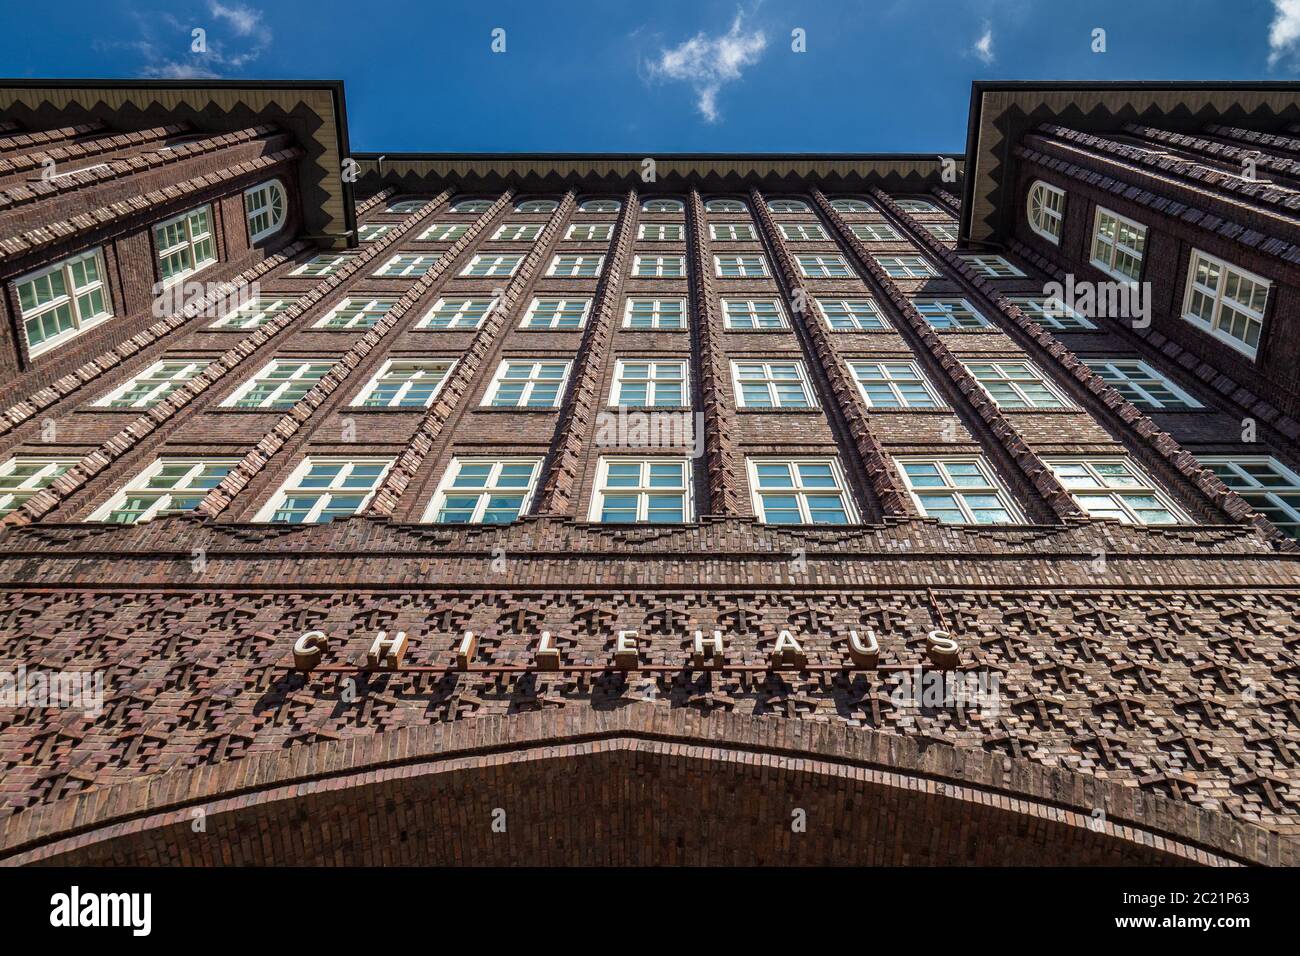 ChileHaus Hamburg - Chile House - example of 1920s Brick Expressionism architecture - architect Fritz Höger completed 1924 Stock Photo